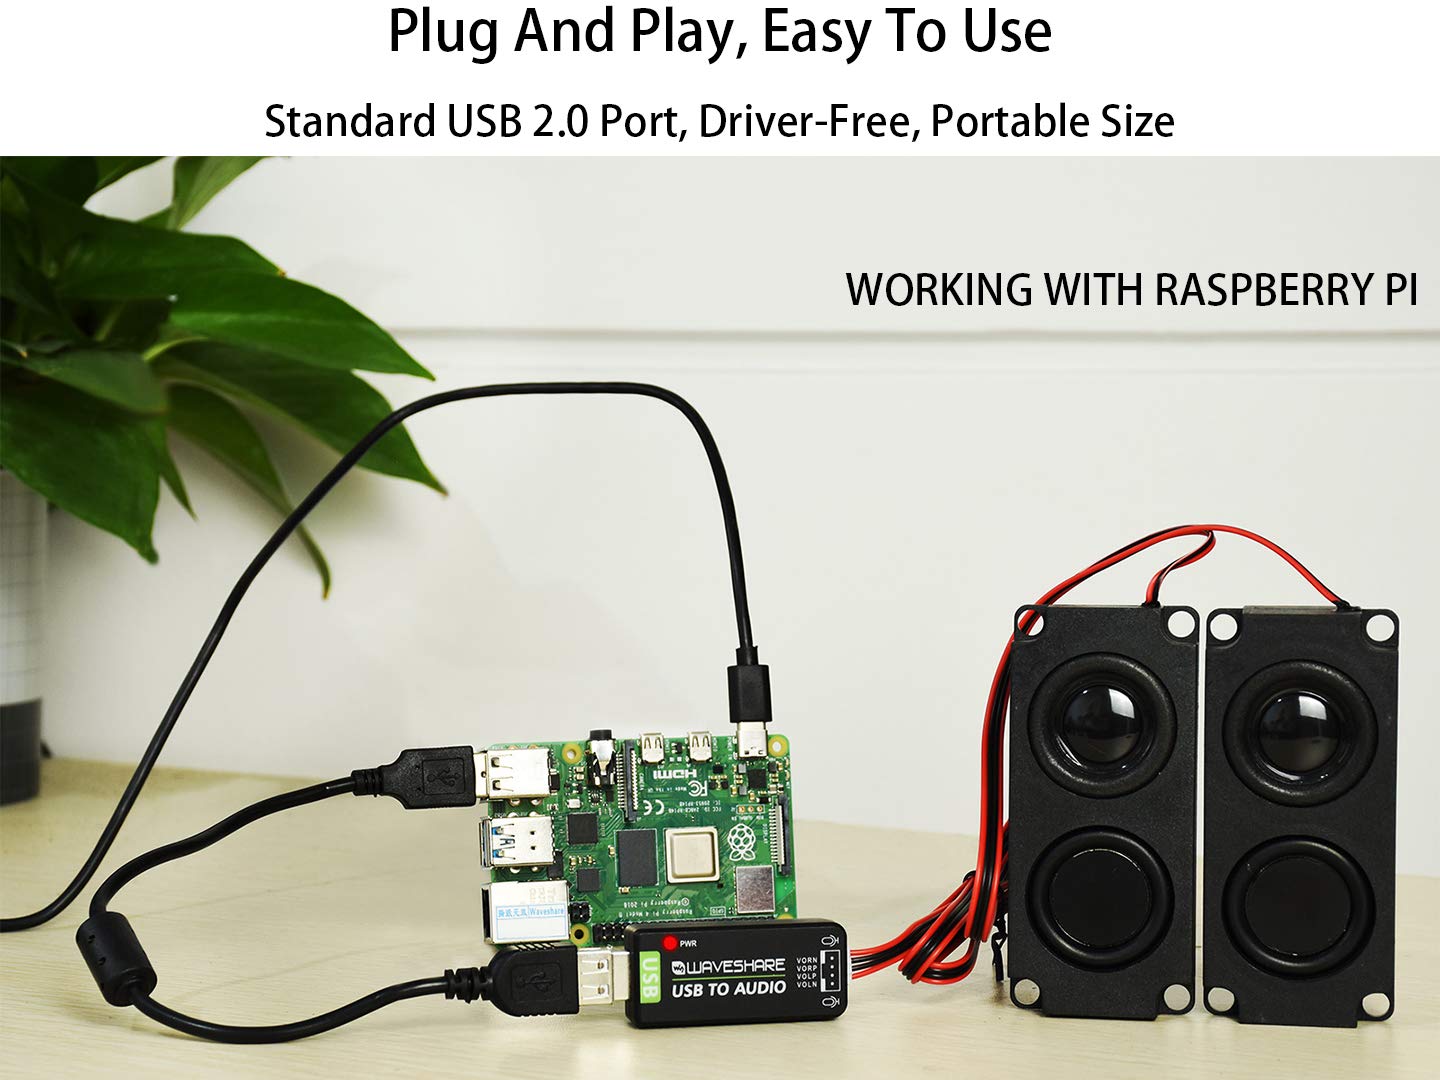 USB to Audio Adapter External Stereo Sound Card Converter with 8Ω 5W Speaker for Raspberry Pi/Jetson Nano, Win7/8/8.1/10,Mac,Linux,Android, USB 2.0 Port Driver-Free, Plug and Play